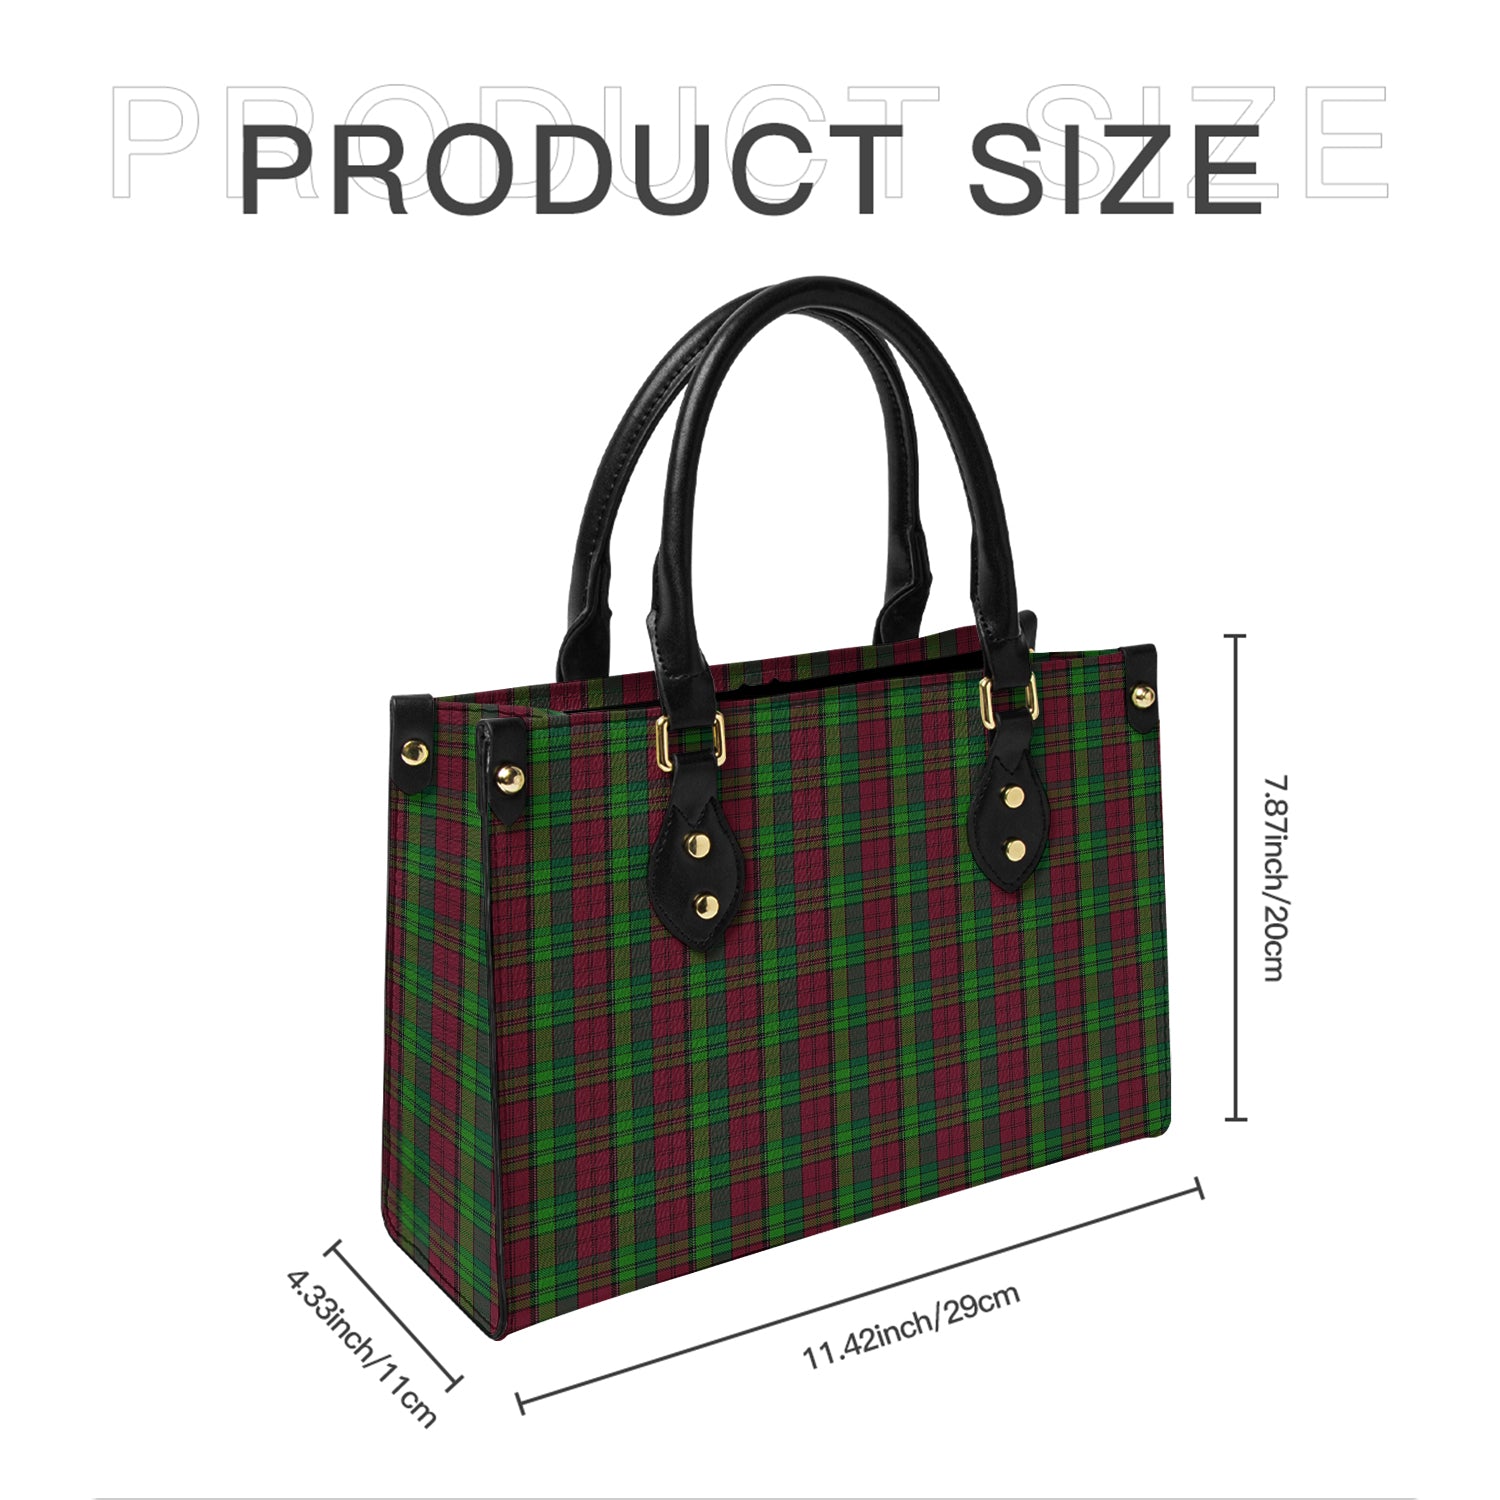 pope-of-wales-tartan-leather-bag